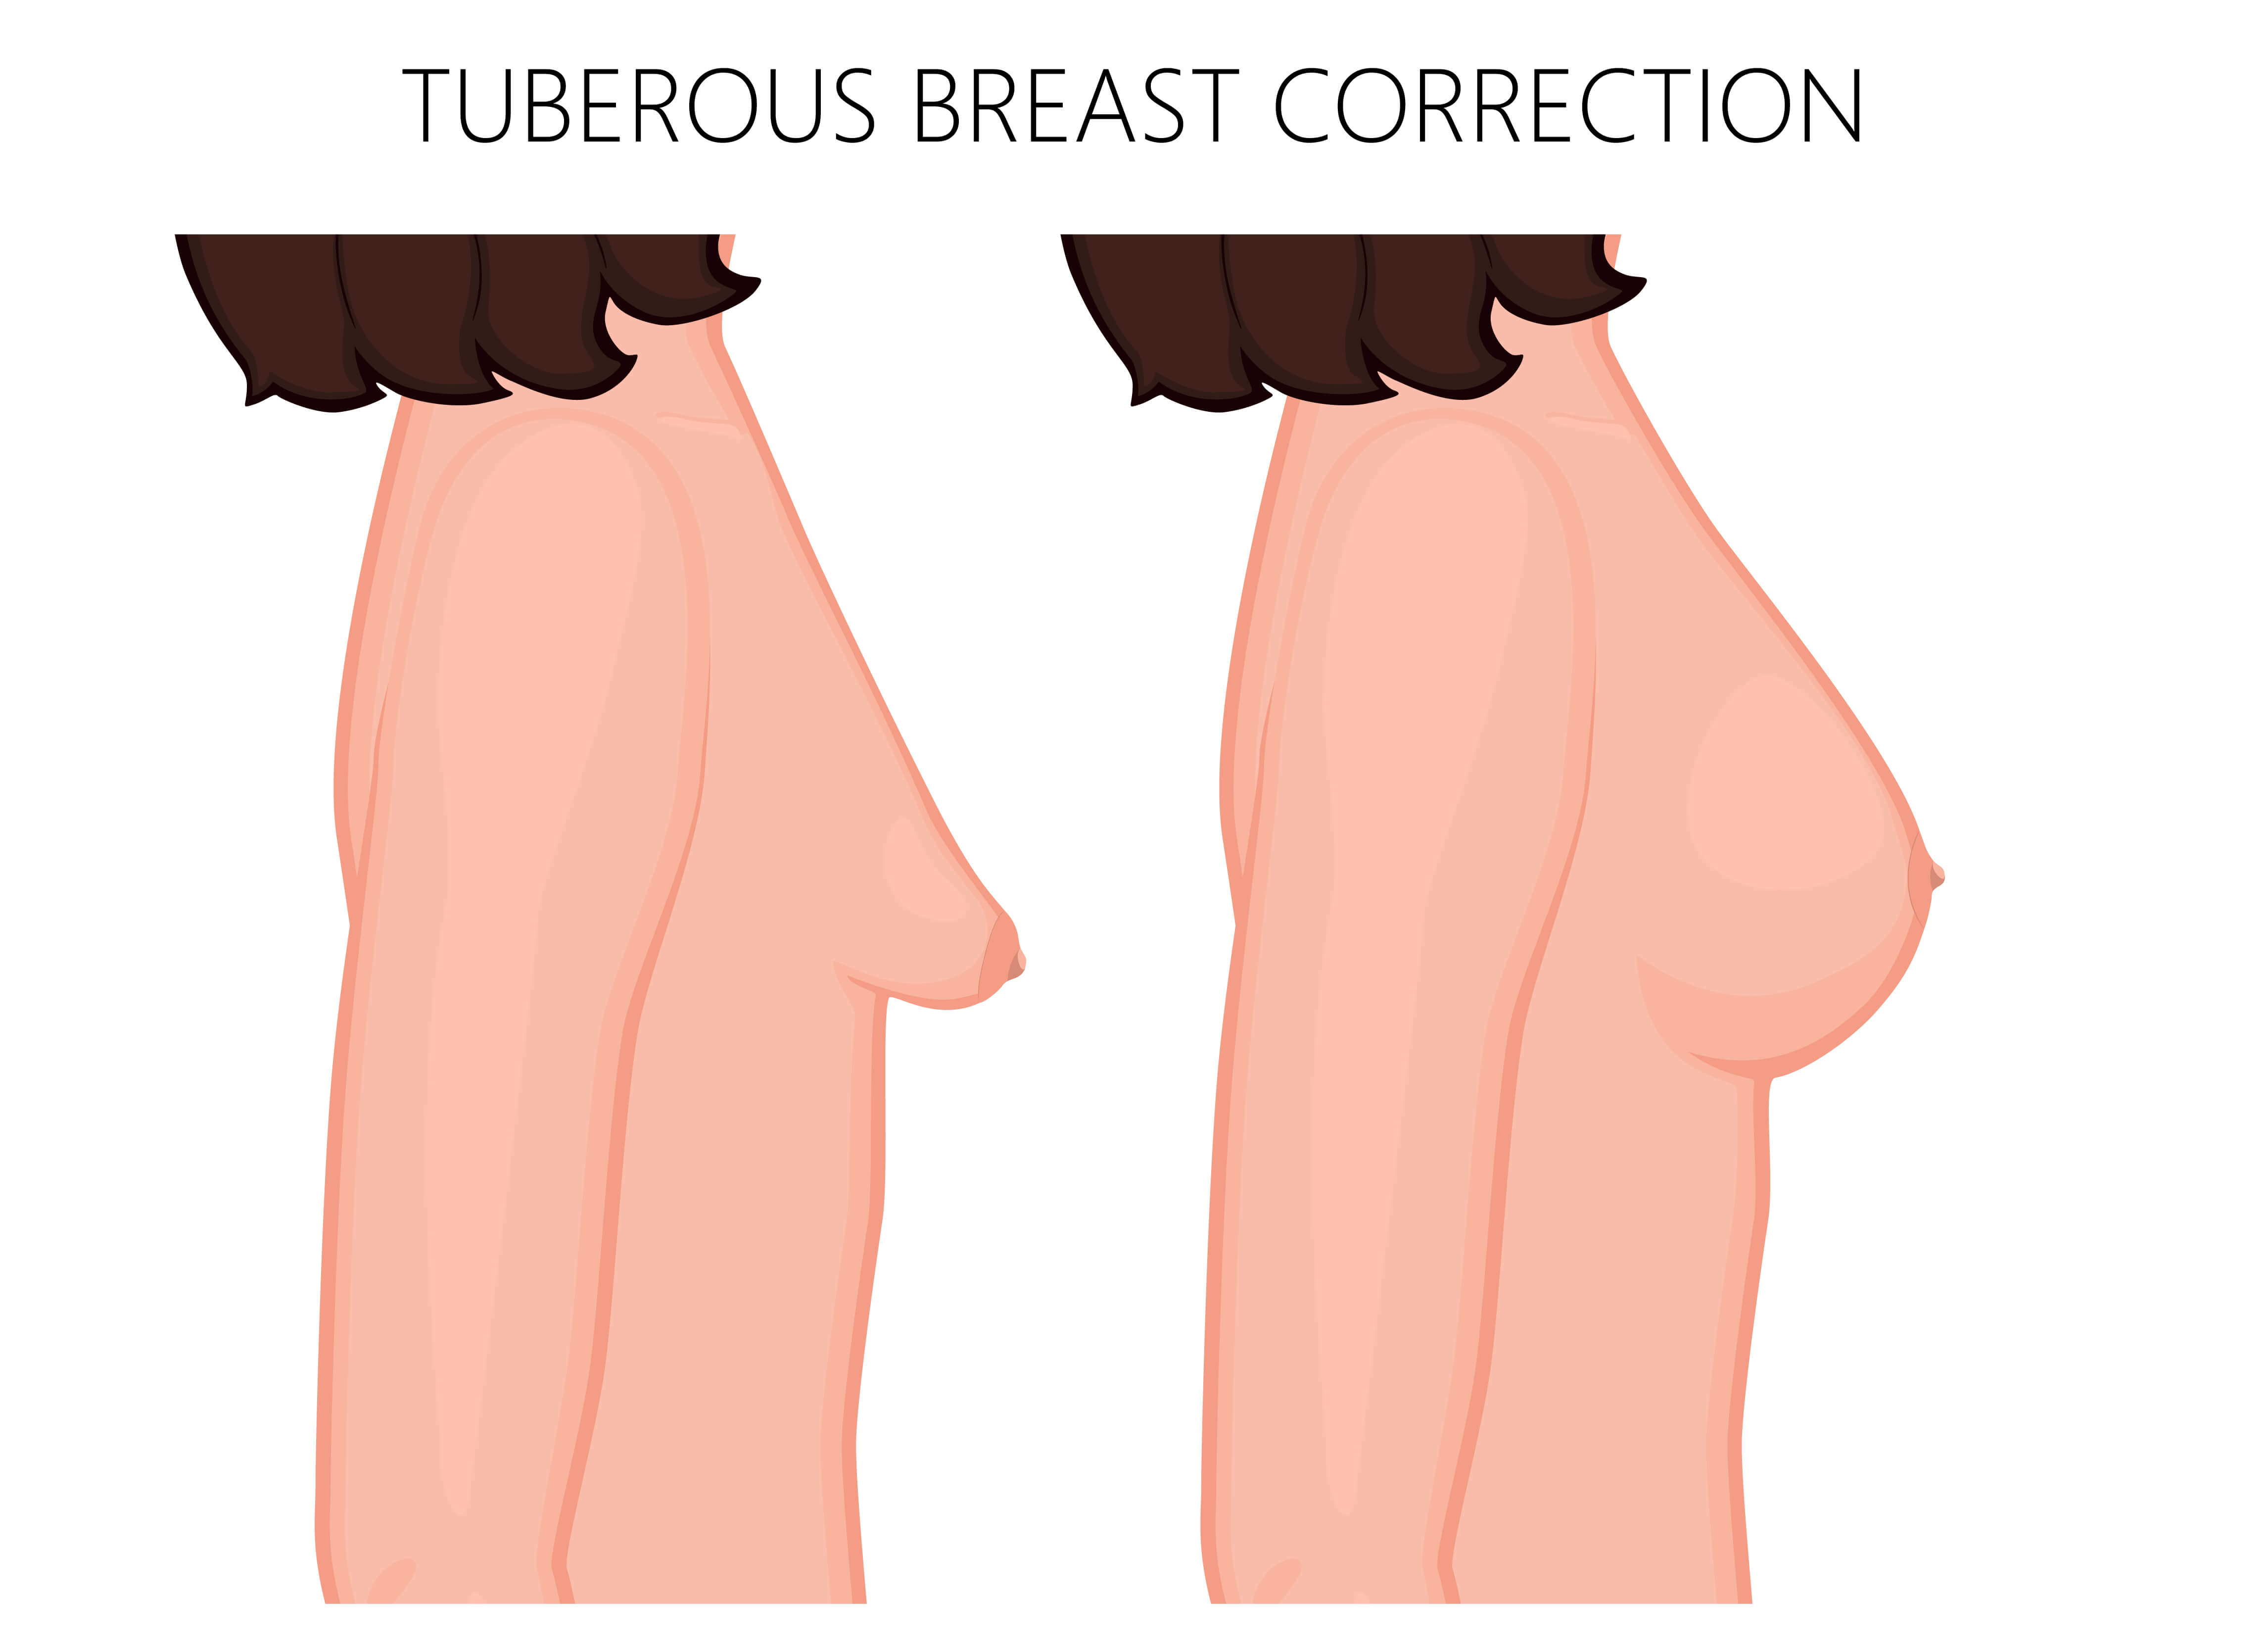 tuberous breasts